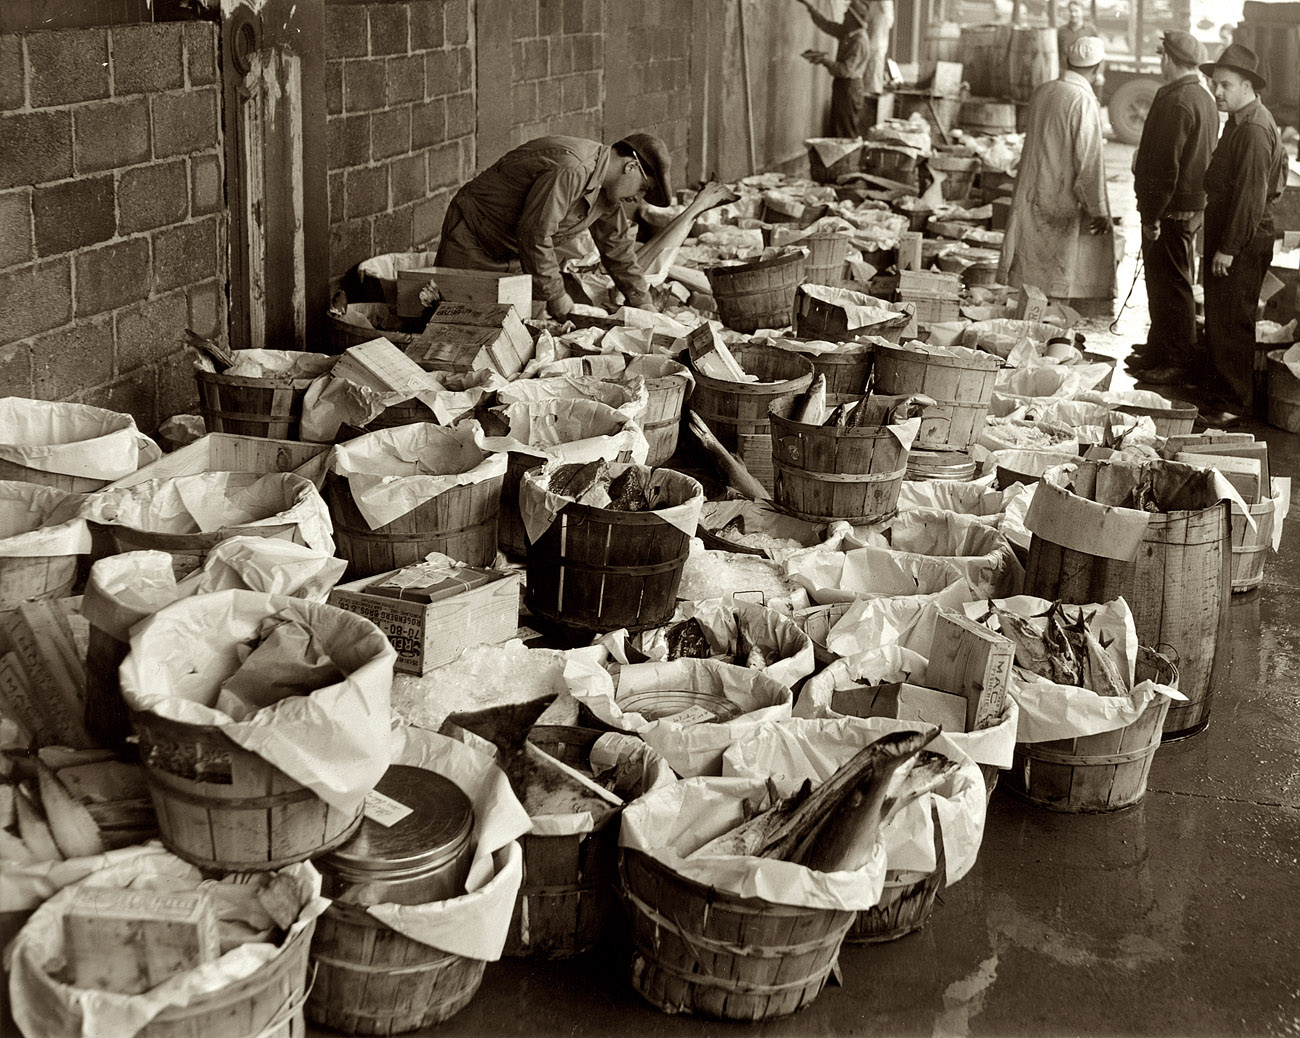 1944. Fulton Fish Market, New York. "Orders being loaded at Teddy's." Photo by Al Aumuller. New York World-Telegram and Sun Collection. View full size.